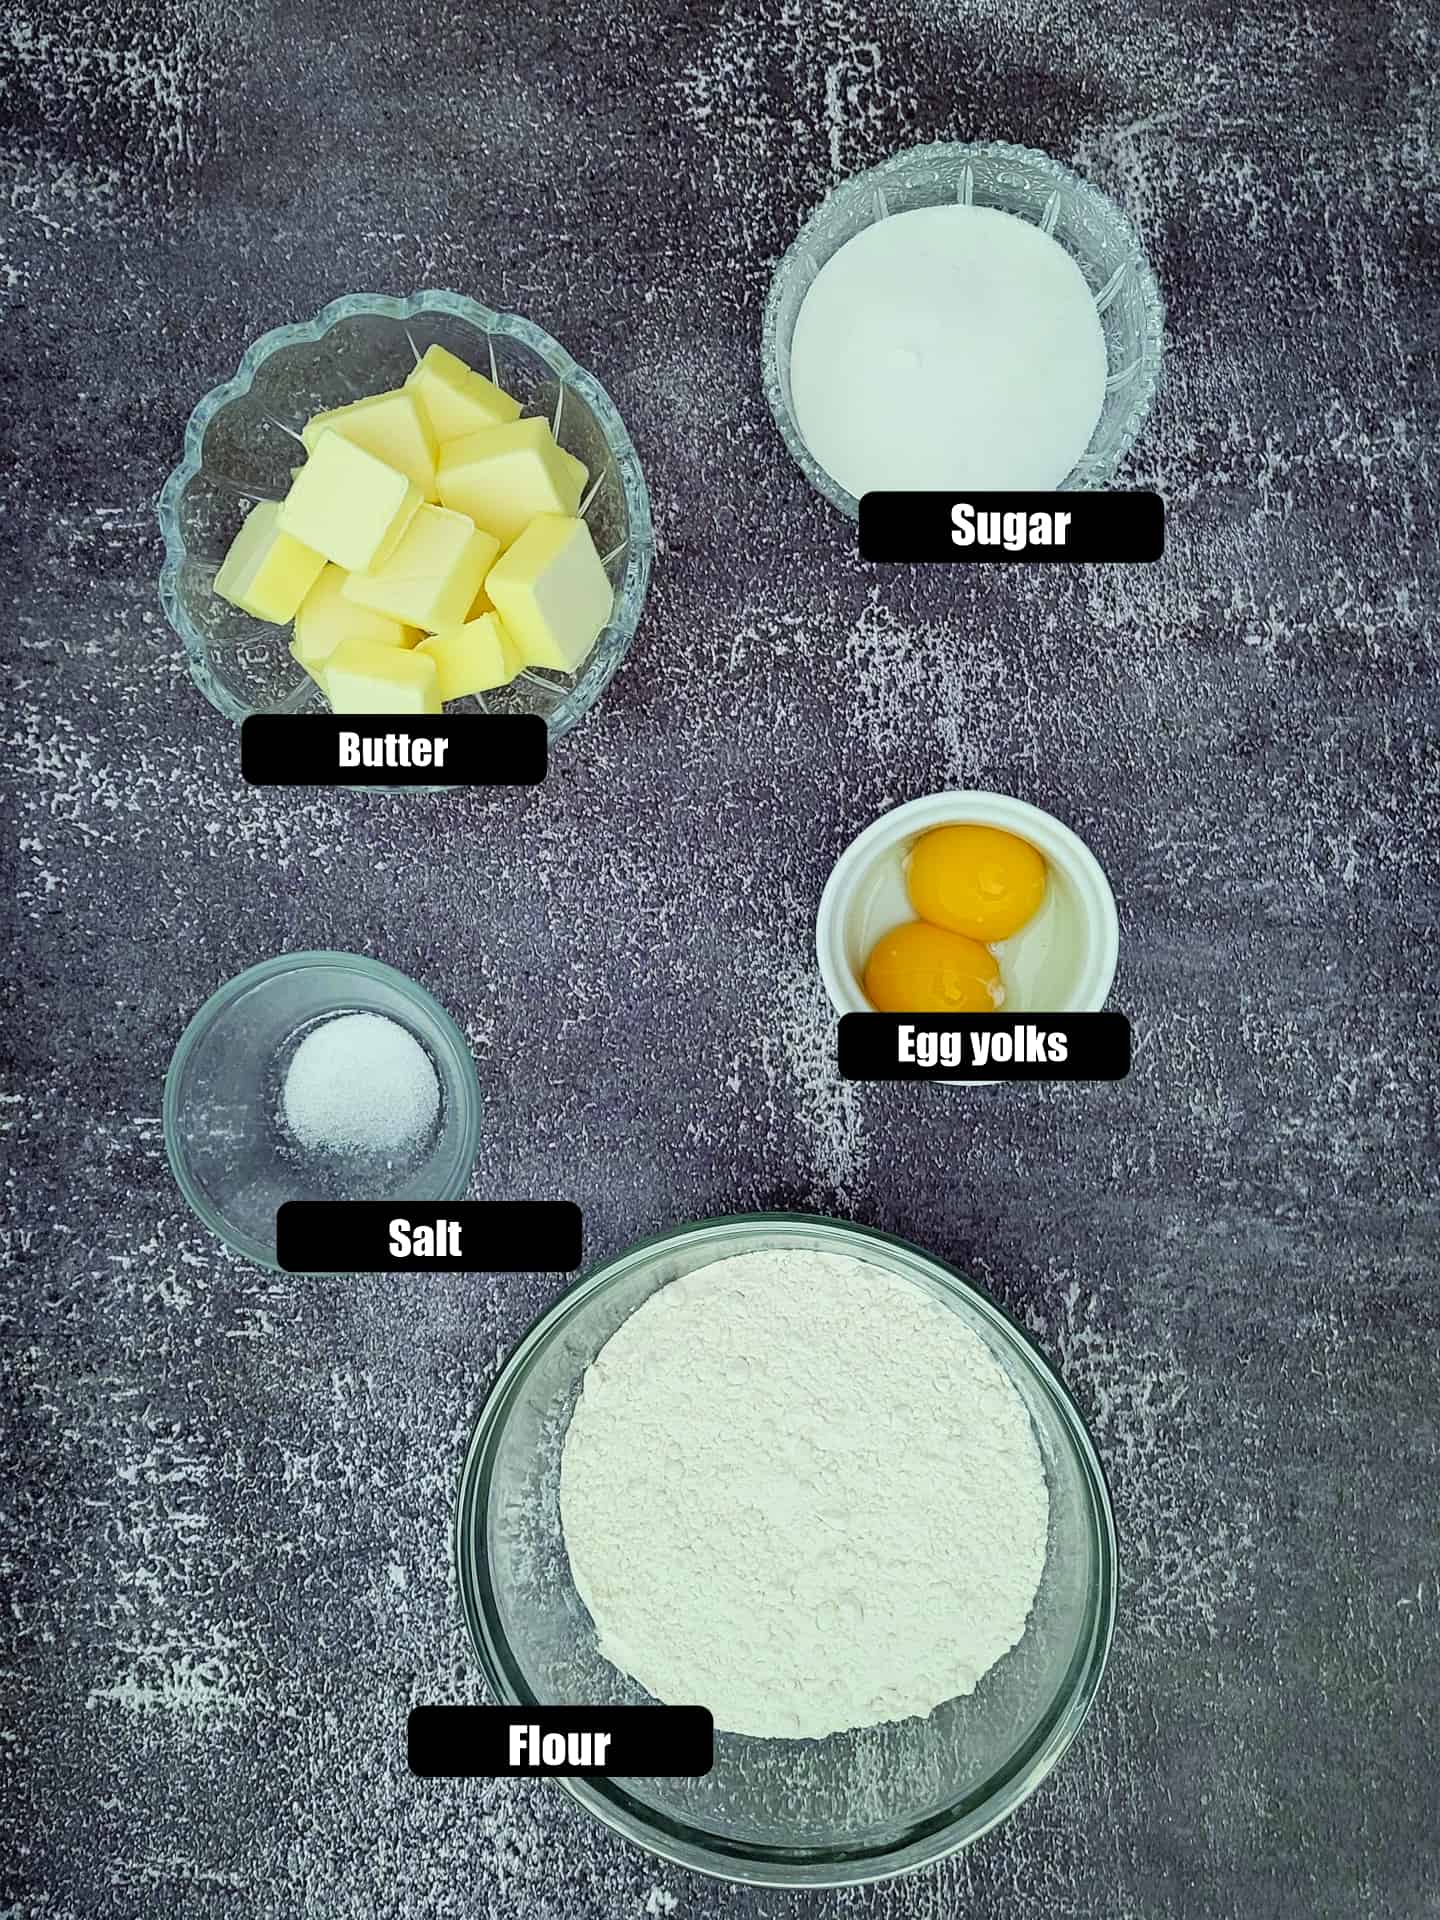 ingredients needed to make sweet pie dough including flour, egg yolks, salt and butter